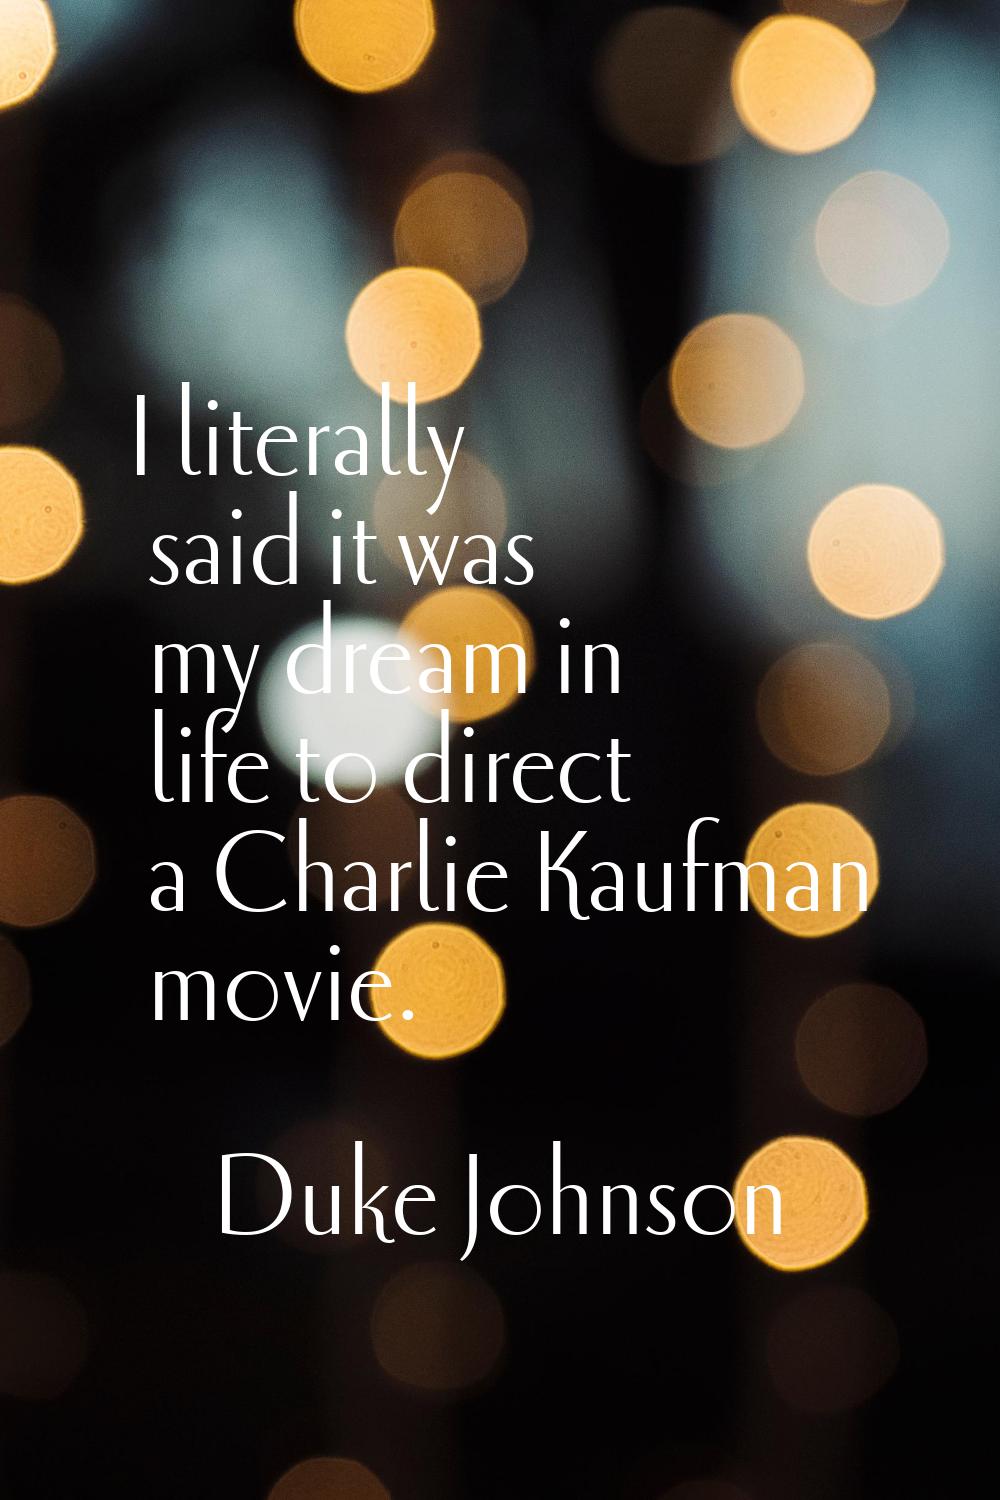 I literally said it was my dream in life to direct a Charlie Kaufman movie.